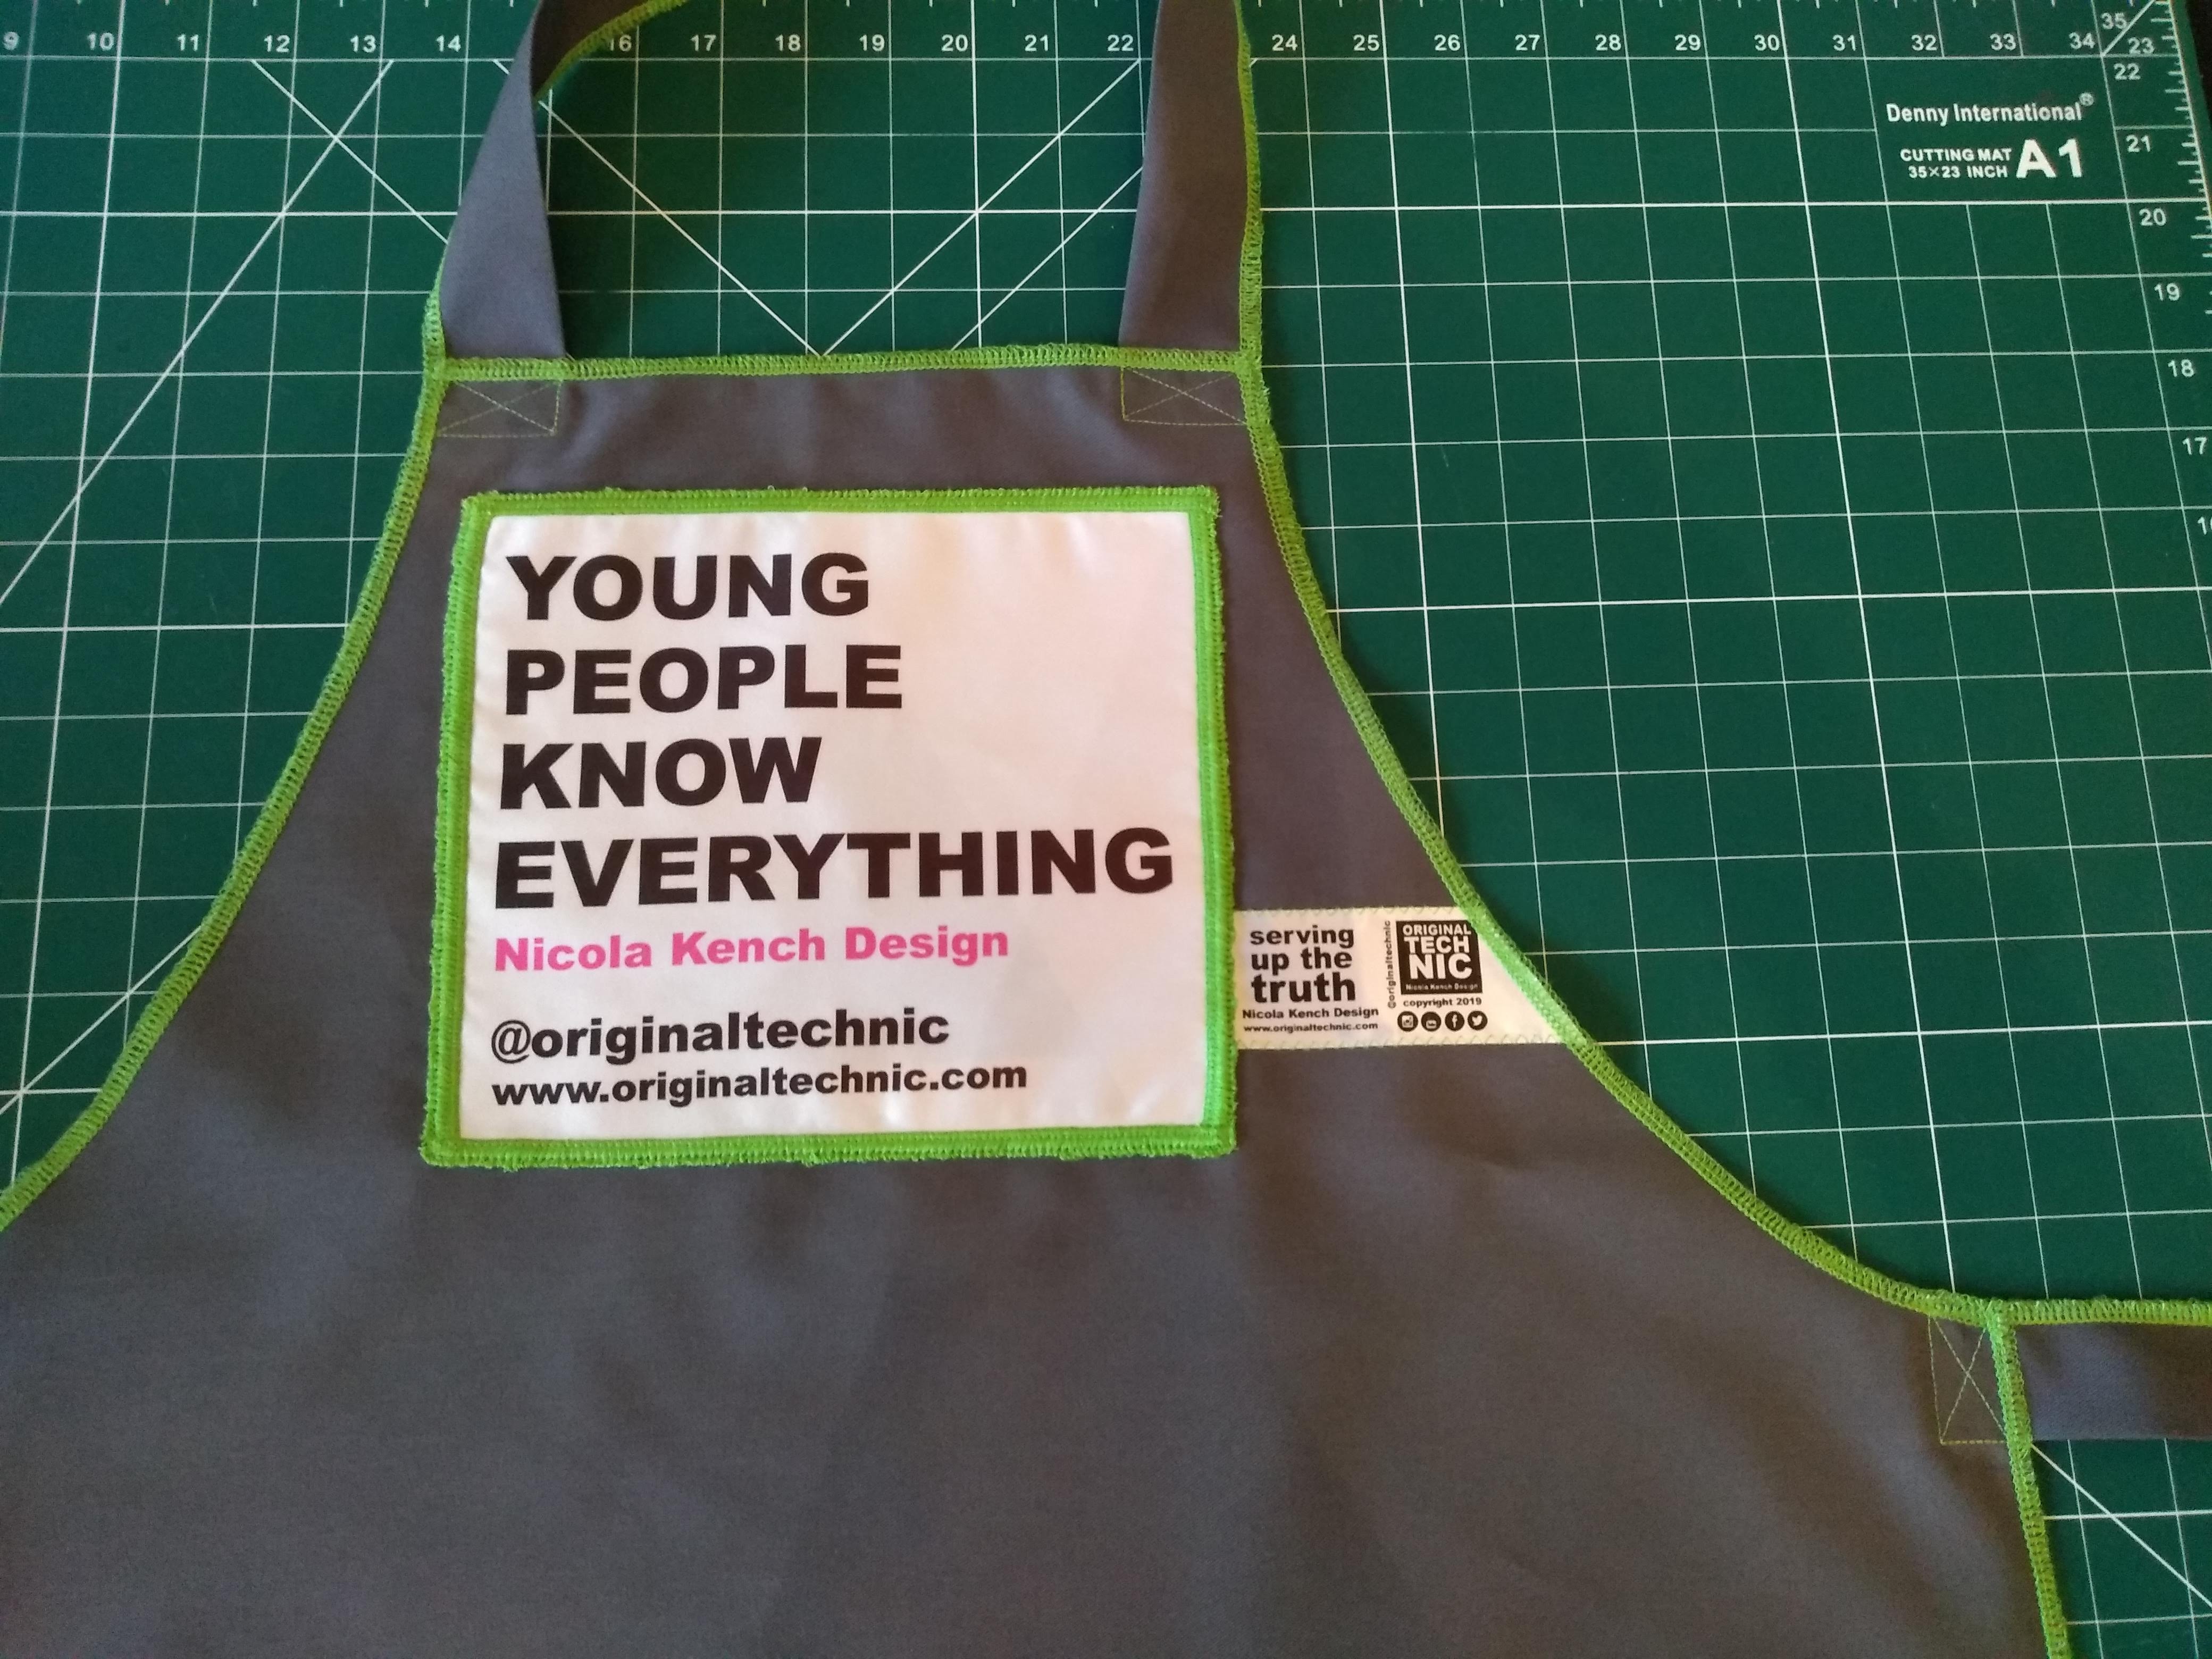 Apron of Truth young people Nicola Kench Design 2019